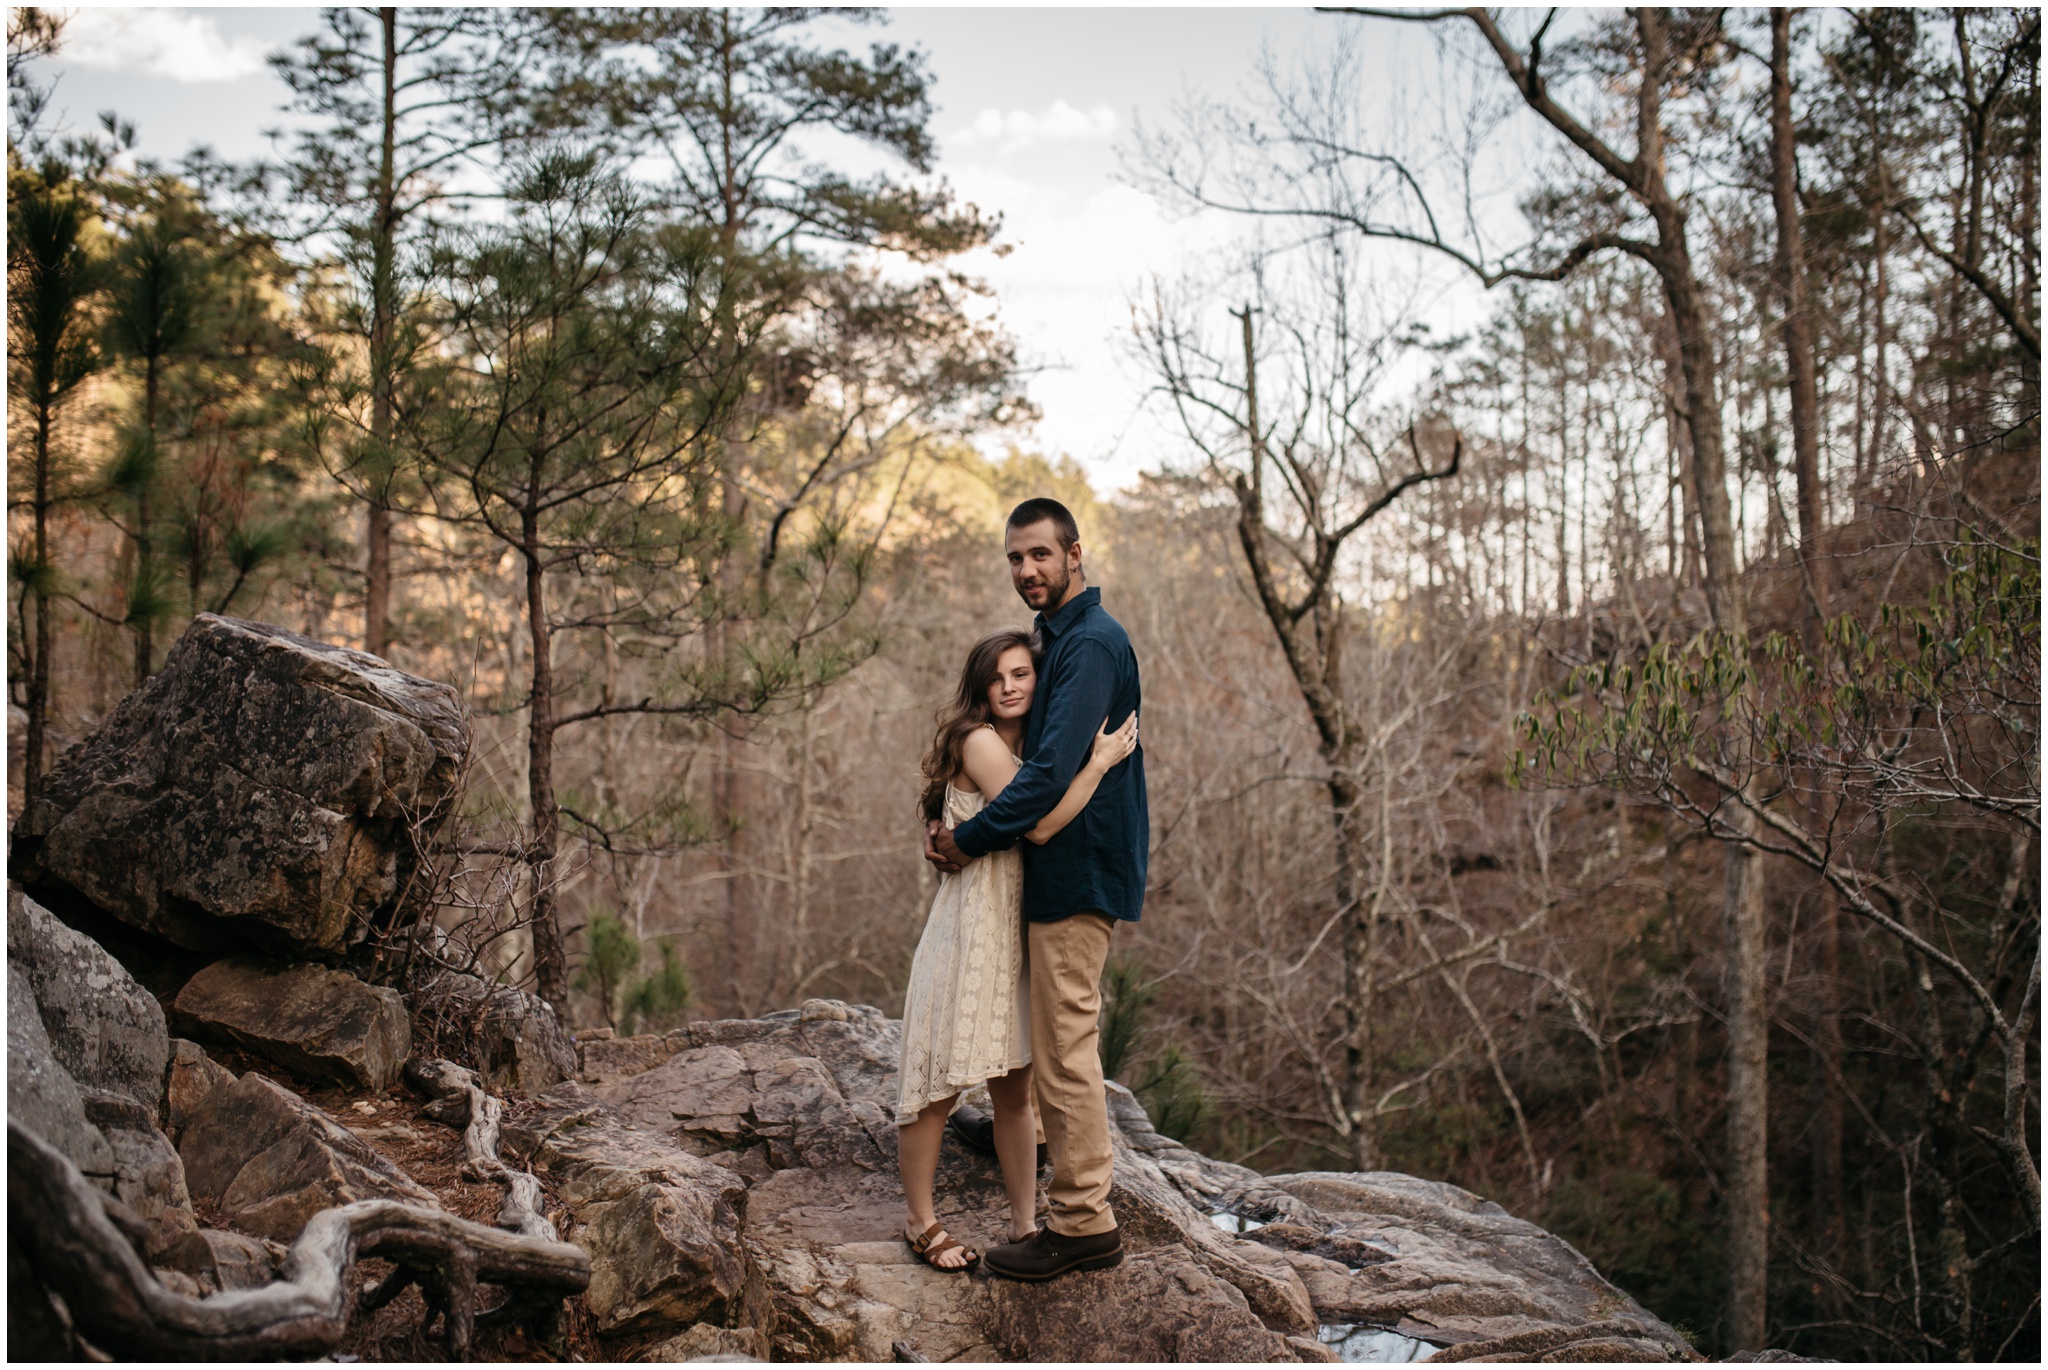 The Morros Photography Maddie and Jake Engagament session at Oak Mountain State Park Alabama_0127.jpg